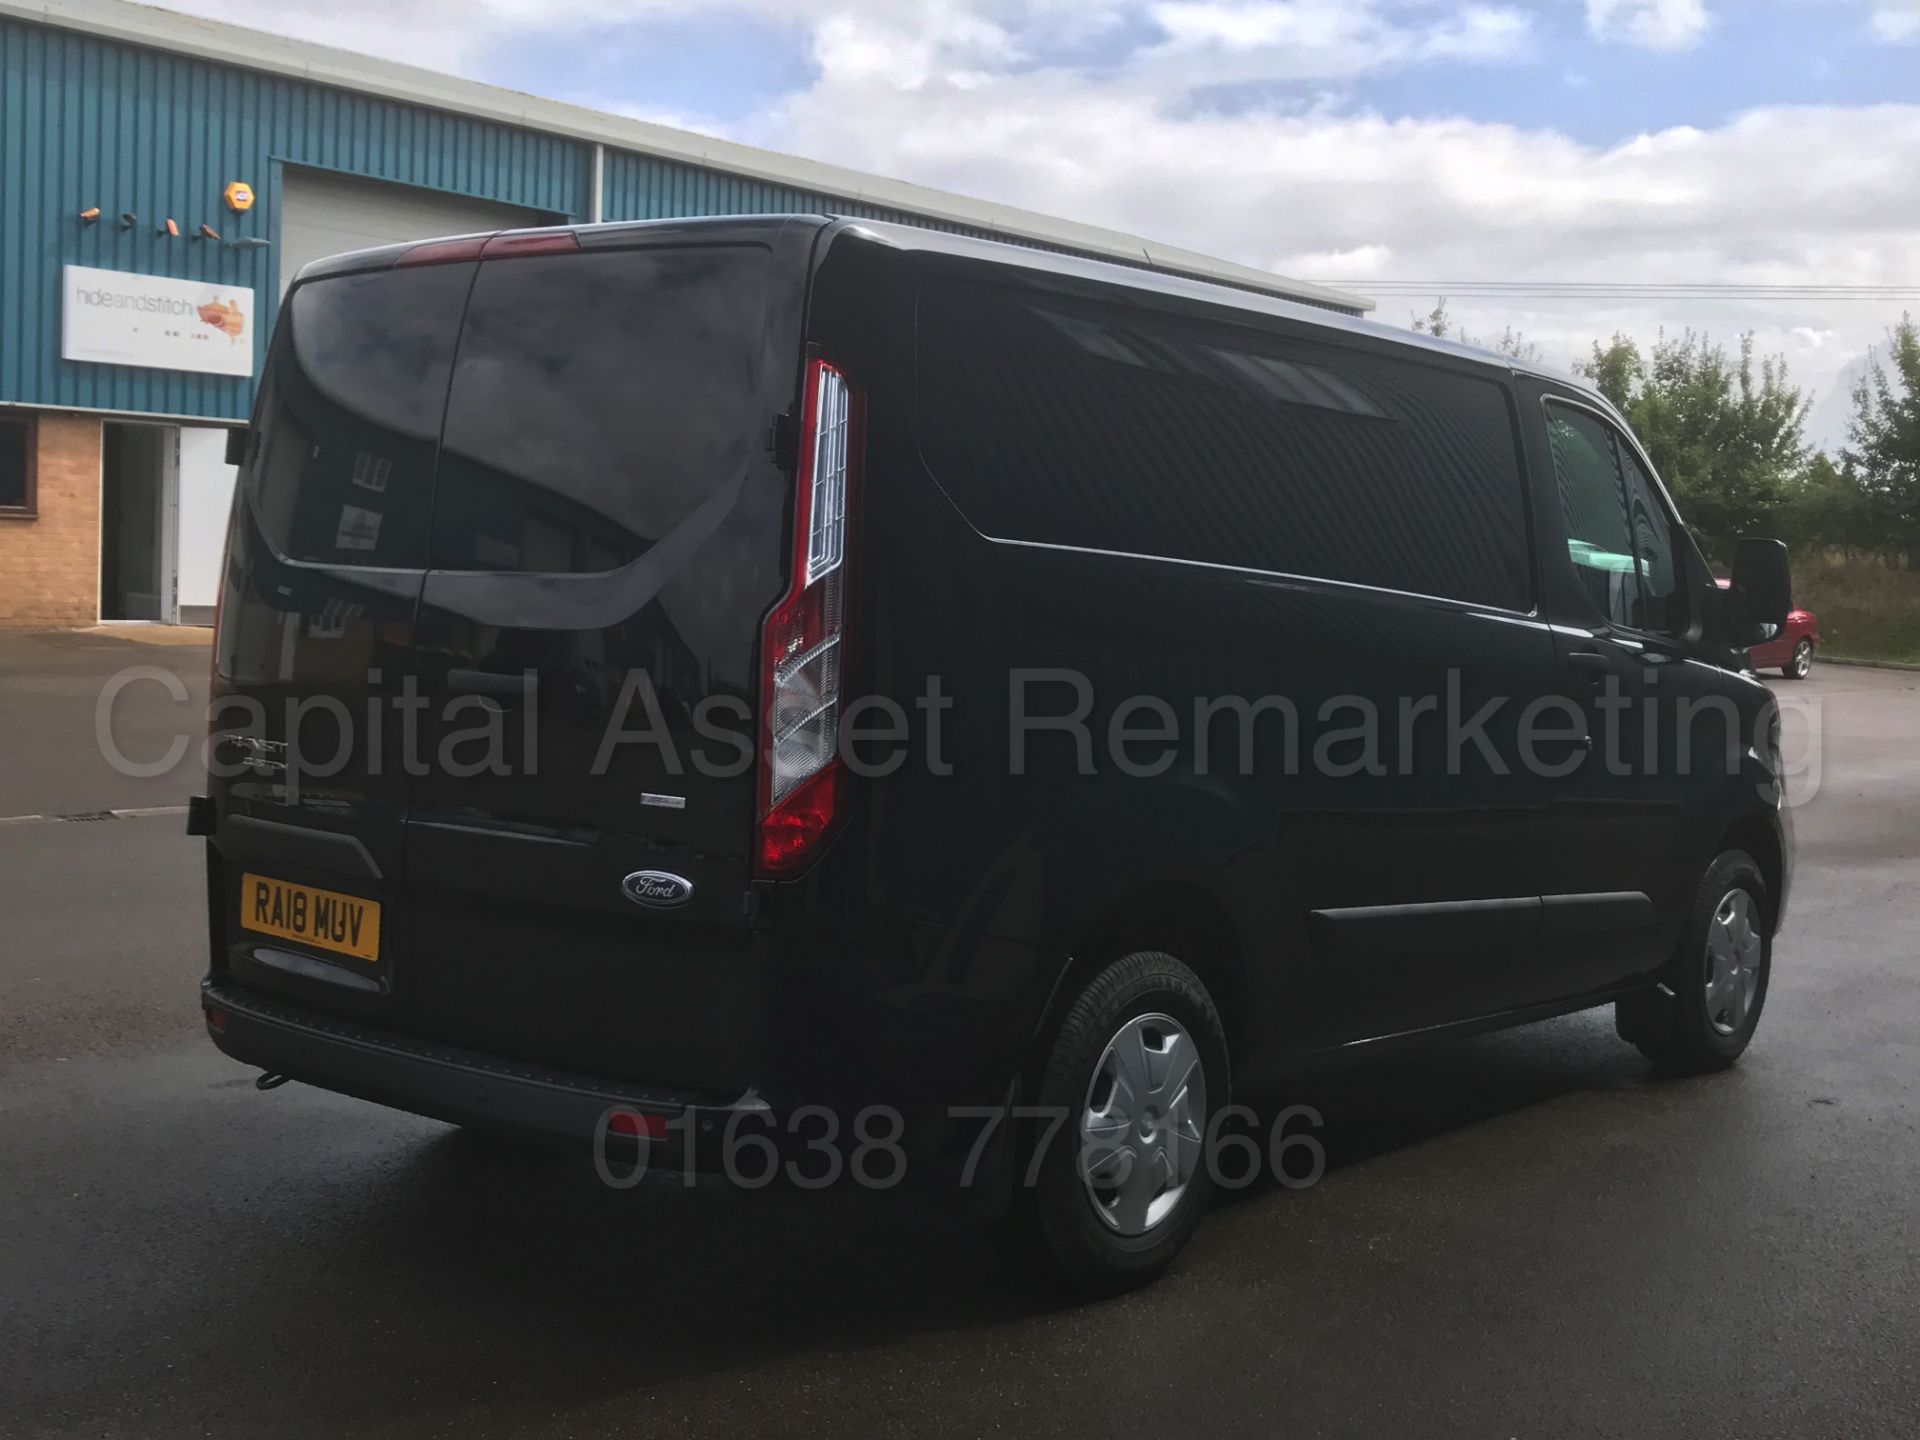 FORD TRANSIT CUSTOM *TREND EDITION* (2018 - ALL NEW MODEL) '2.0 TDCI - 6 SPEED' *DELIVERY MILEAGE* - Image 11 of 49